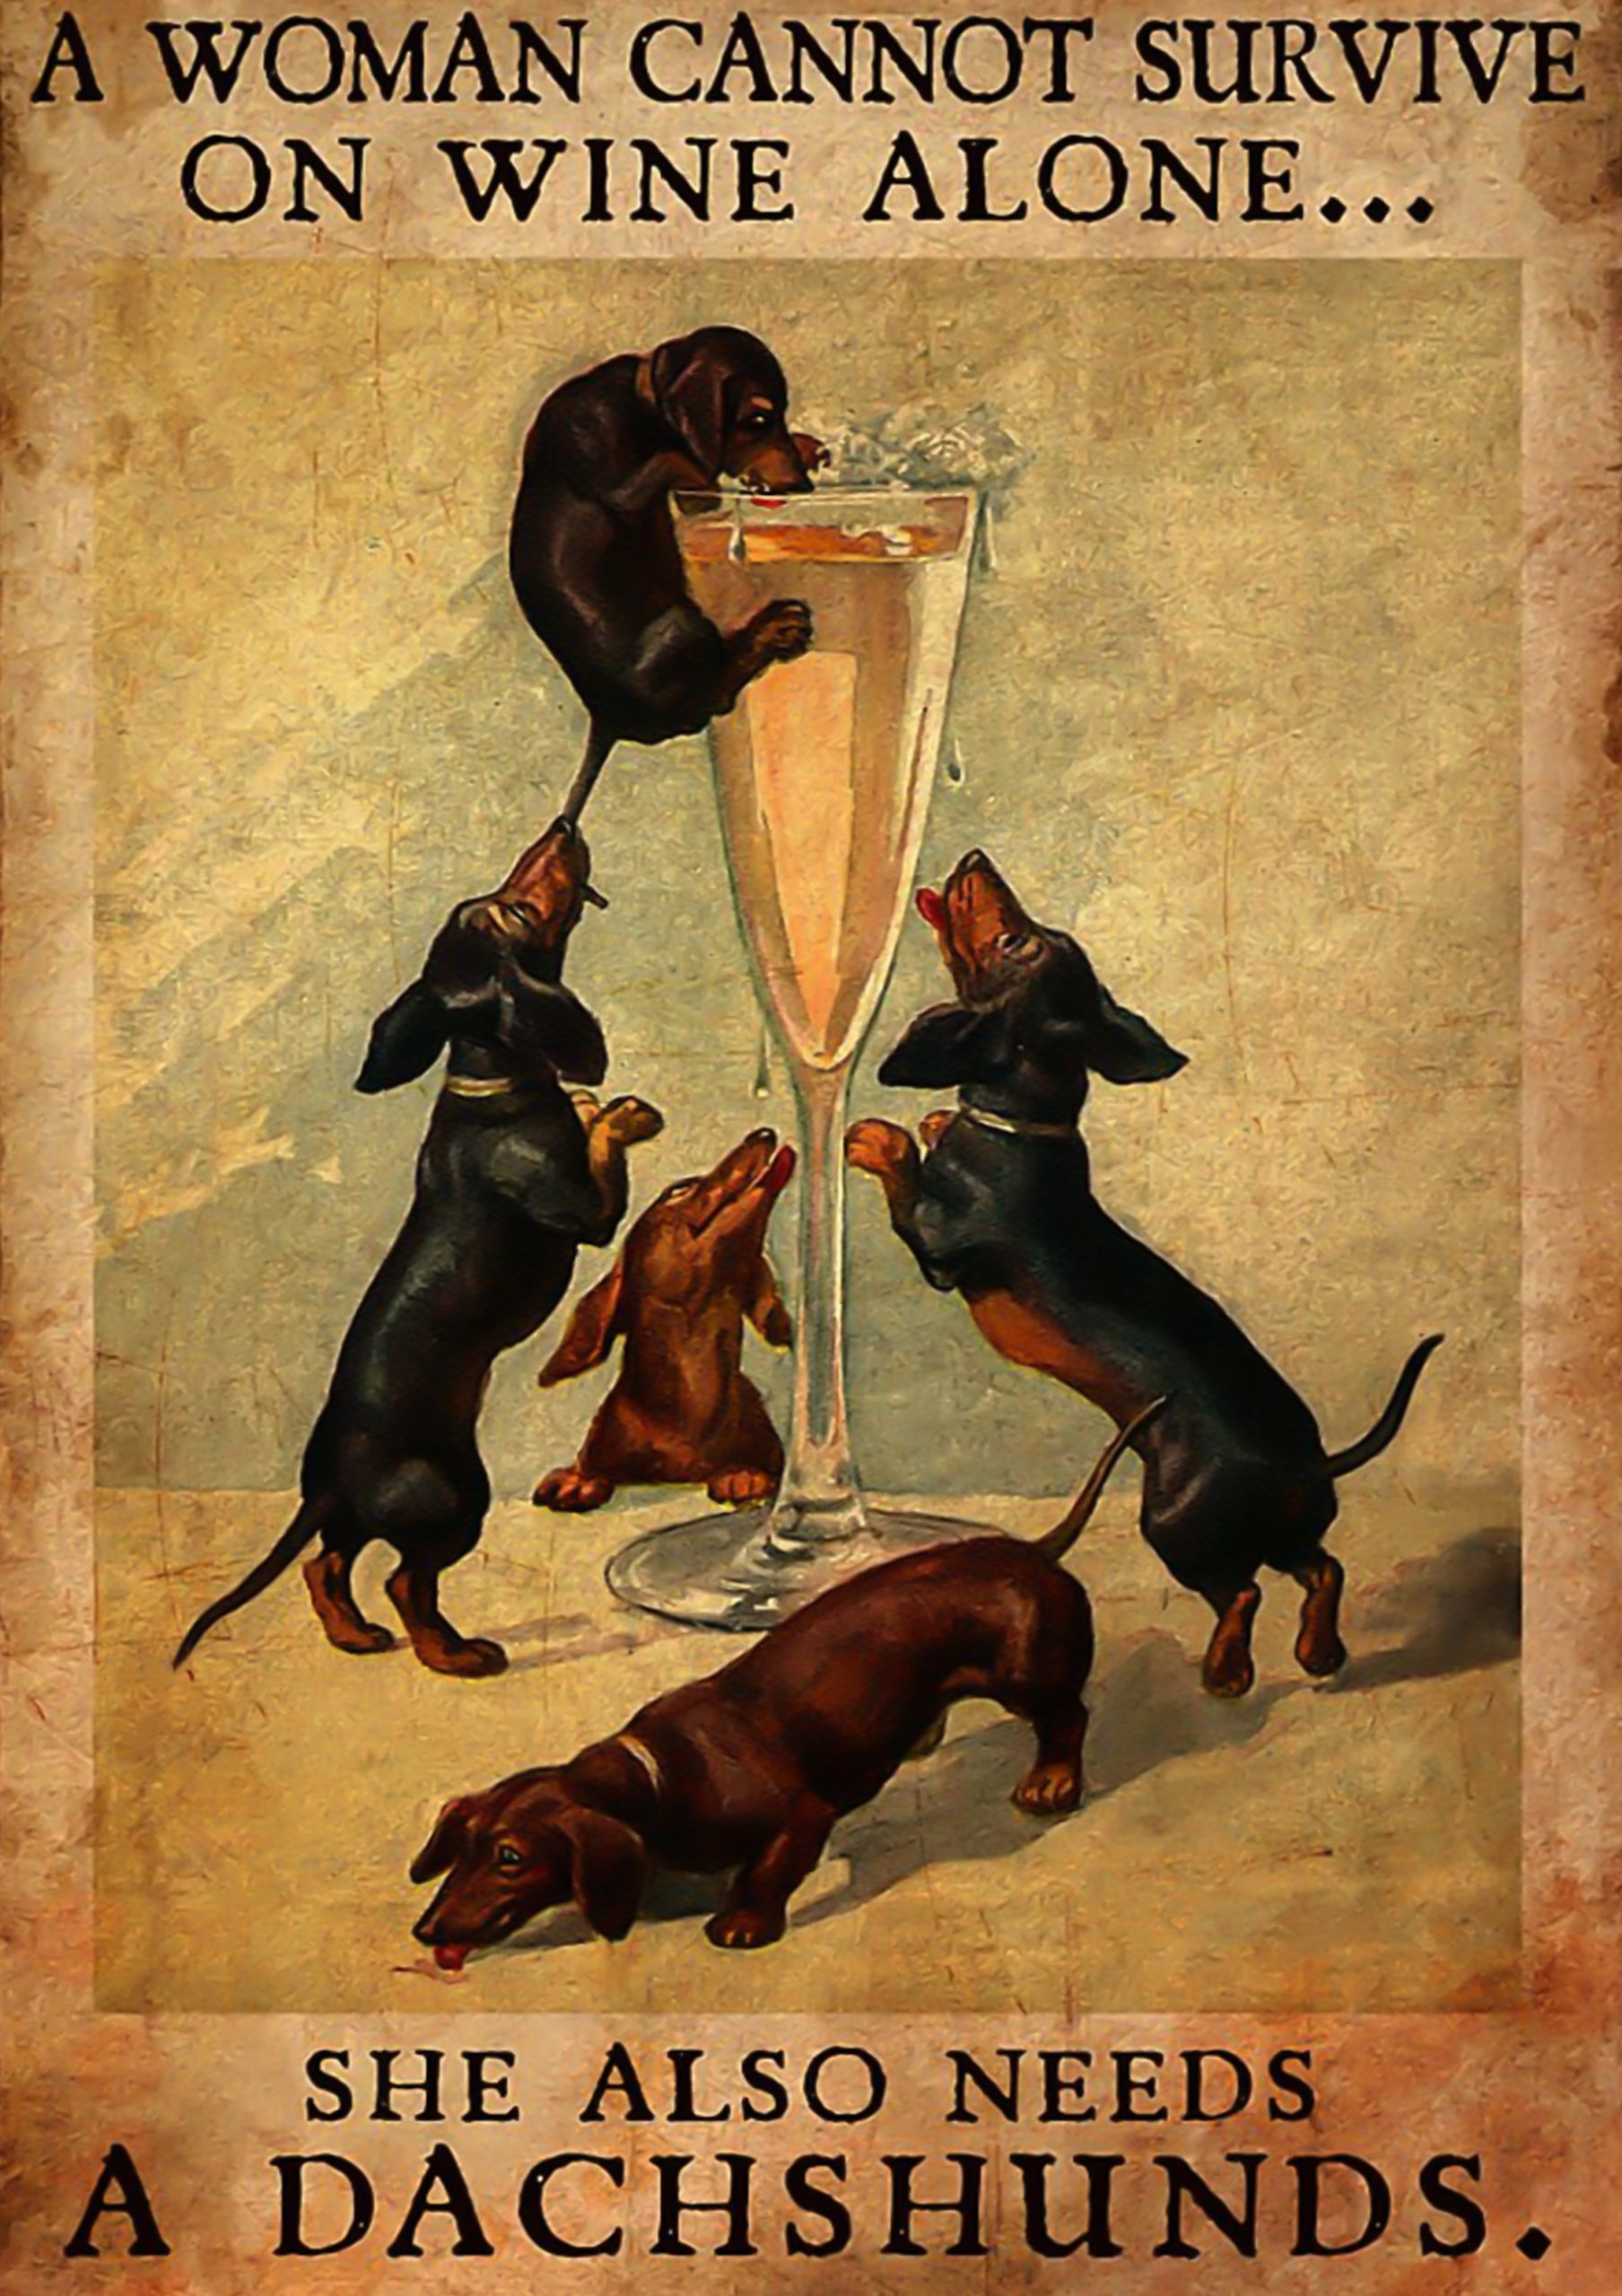 A woman cannot survive on wine alone she also needs a dachshunds poster